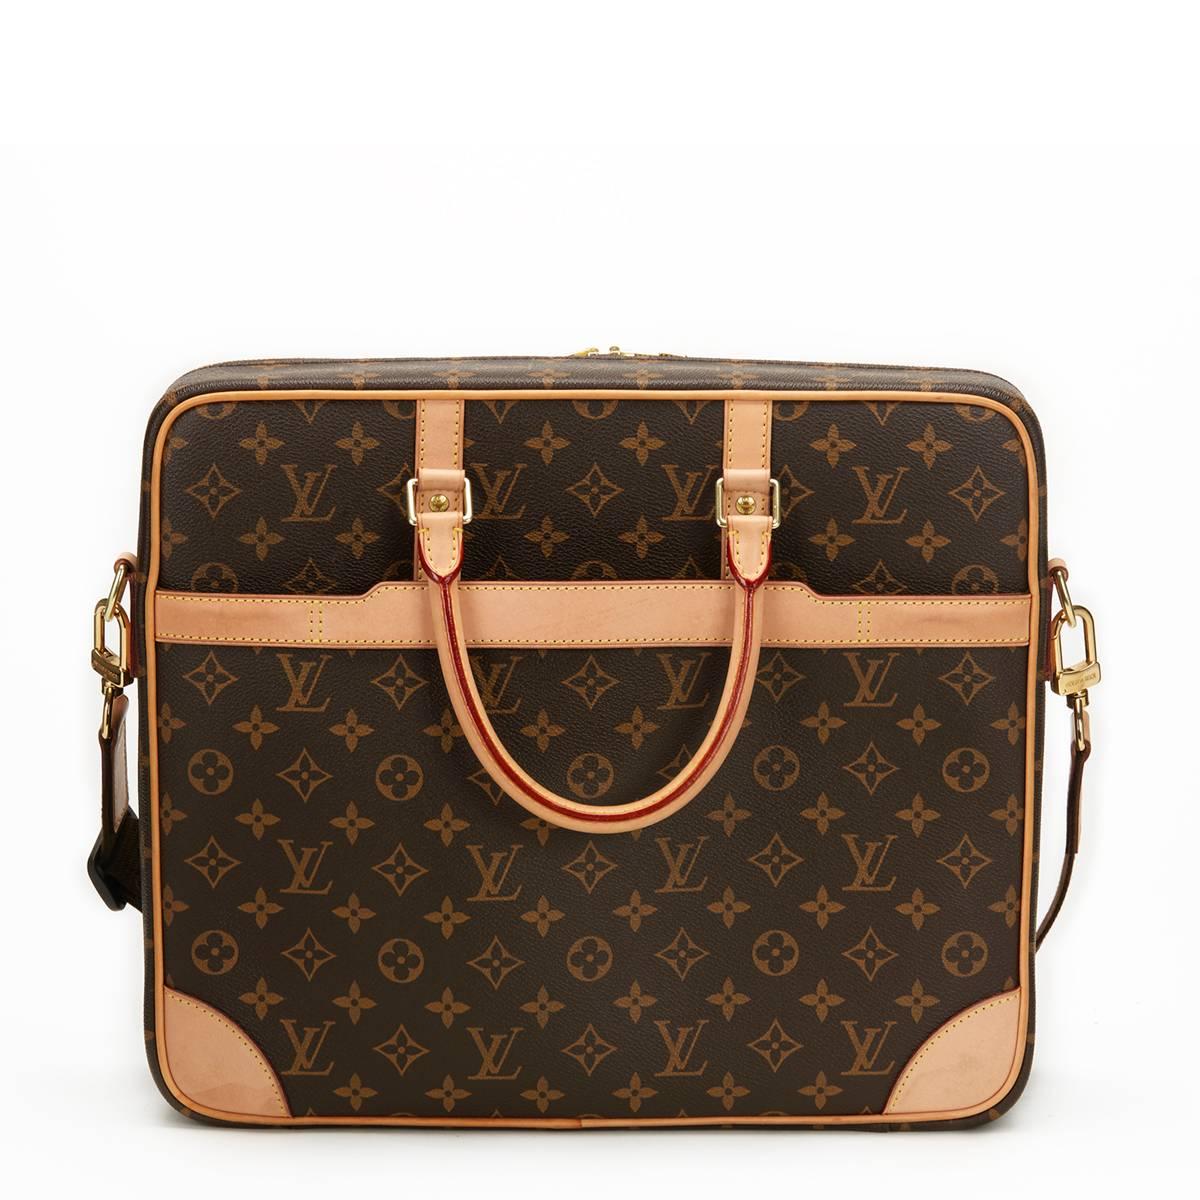 LOUIS VUITTON
BROWN CLASSIC MONOGRAM CANVAS CUPERTINO LAPTOP BAG 2011

This unisex Louis Vuitton Cupertino Laptop Bag is primarily made from brown coated canvas complimented by golden brass hardware. This bag is in very good pre-owned condition